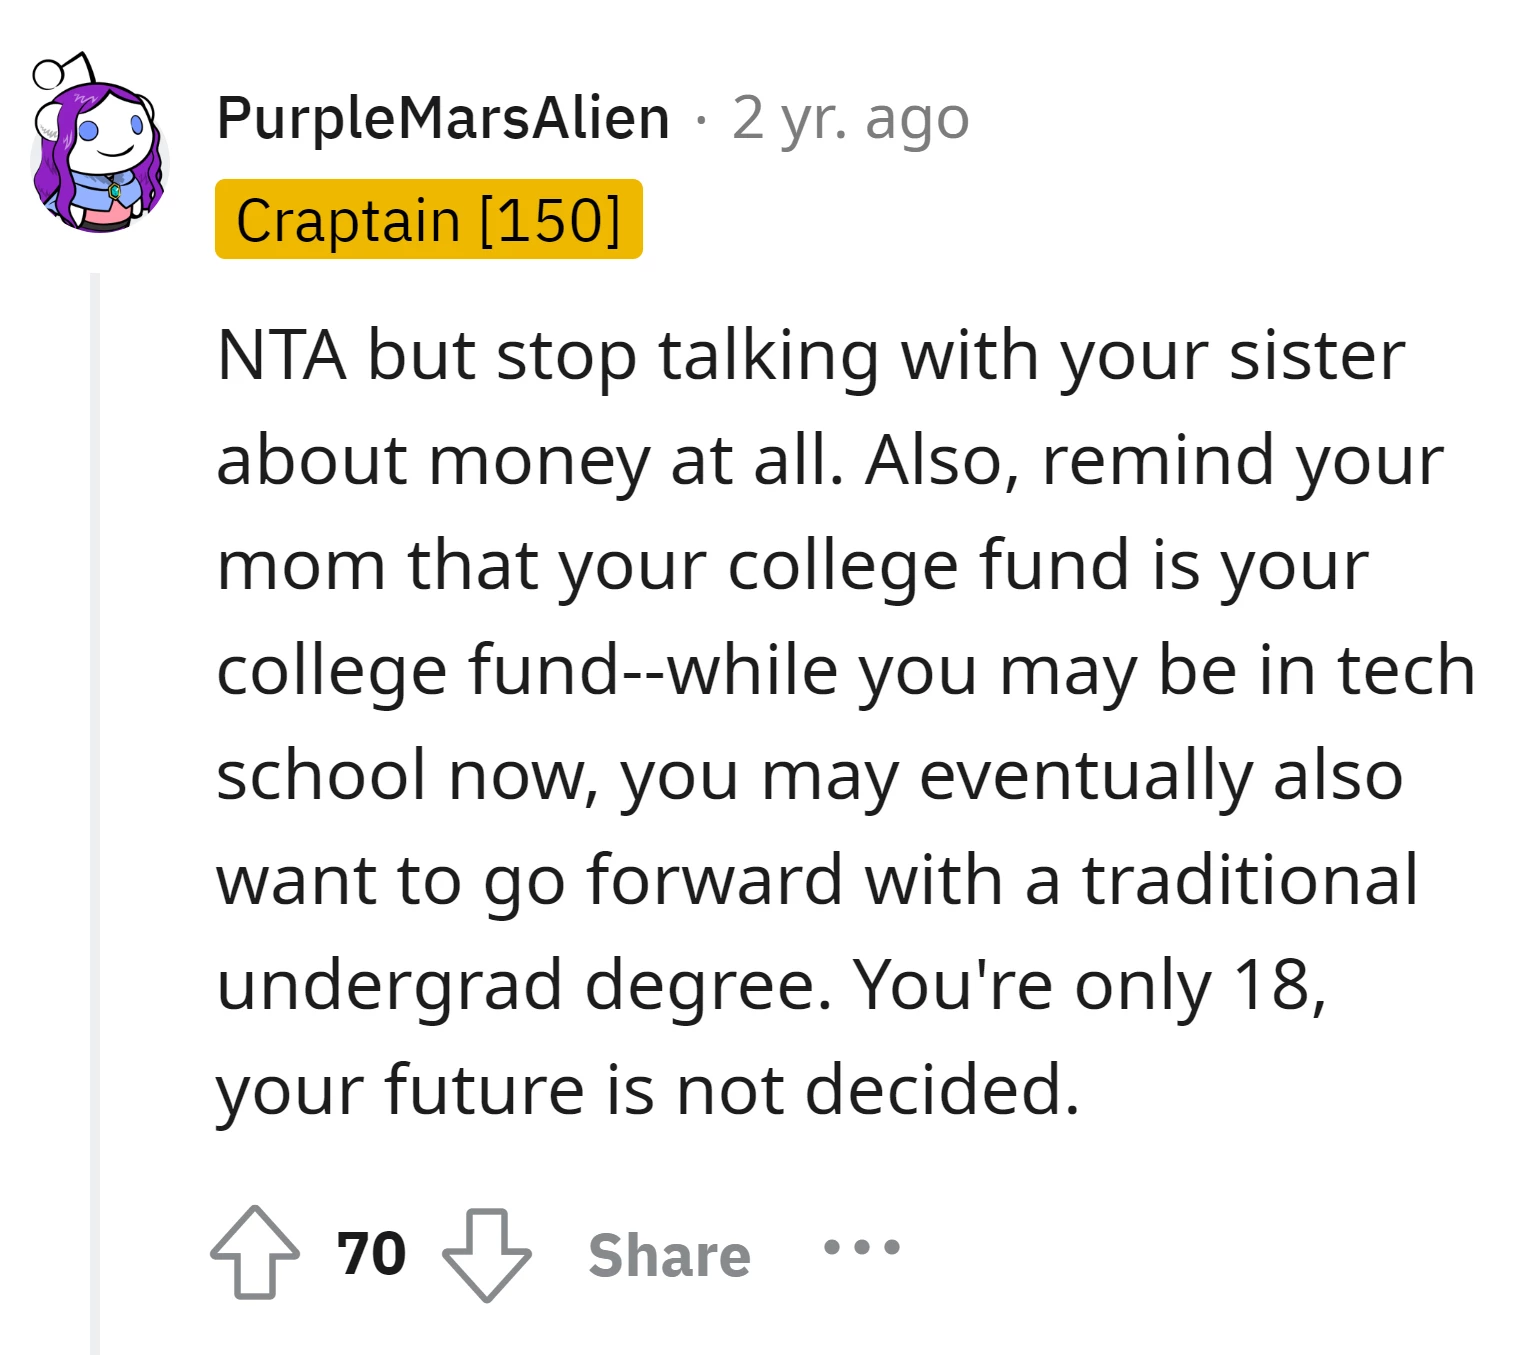 The OP has the right to her college fund regardless of current educational choices